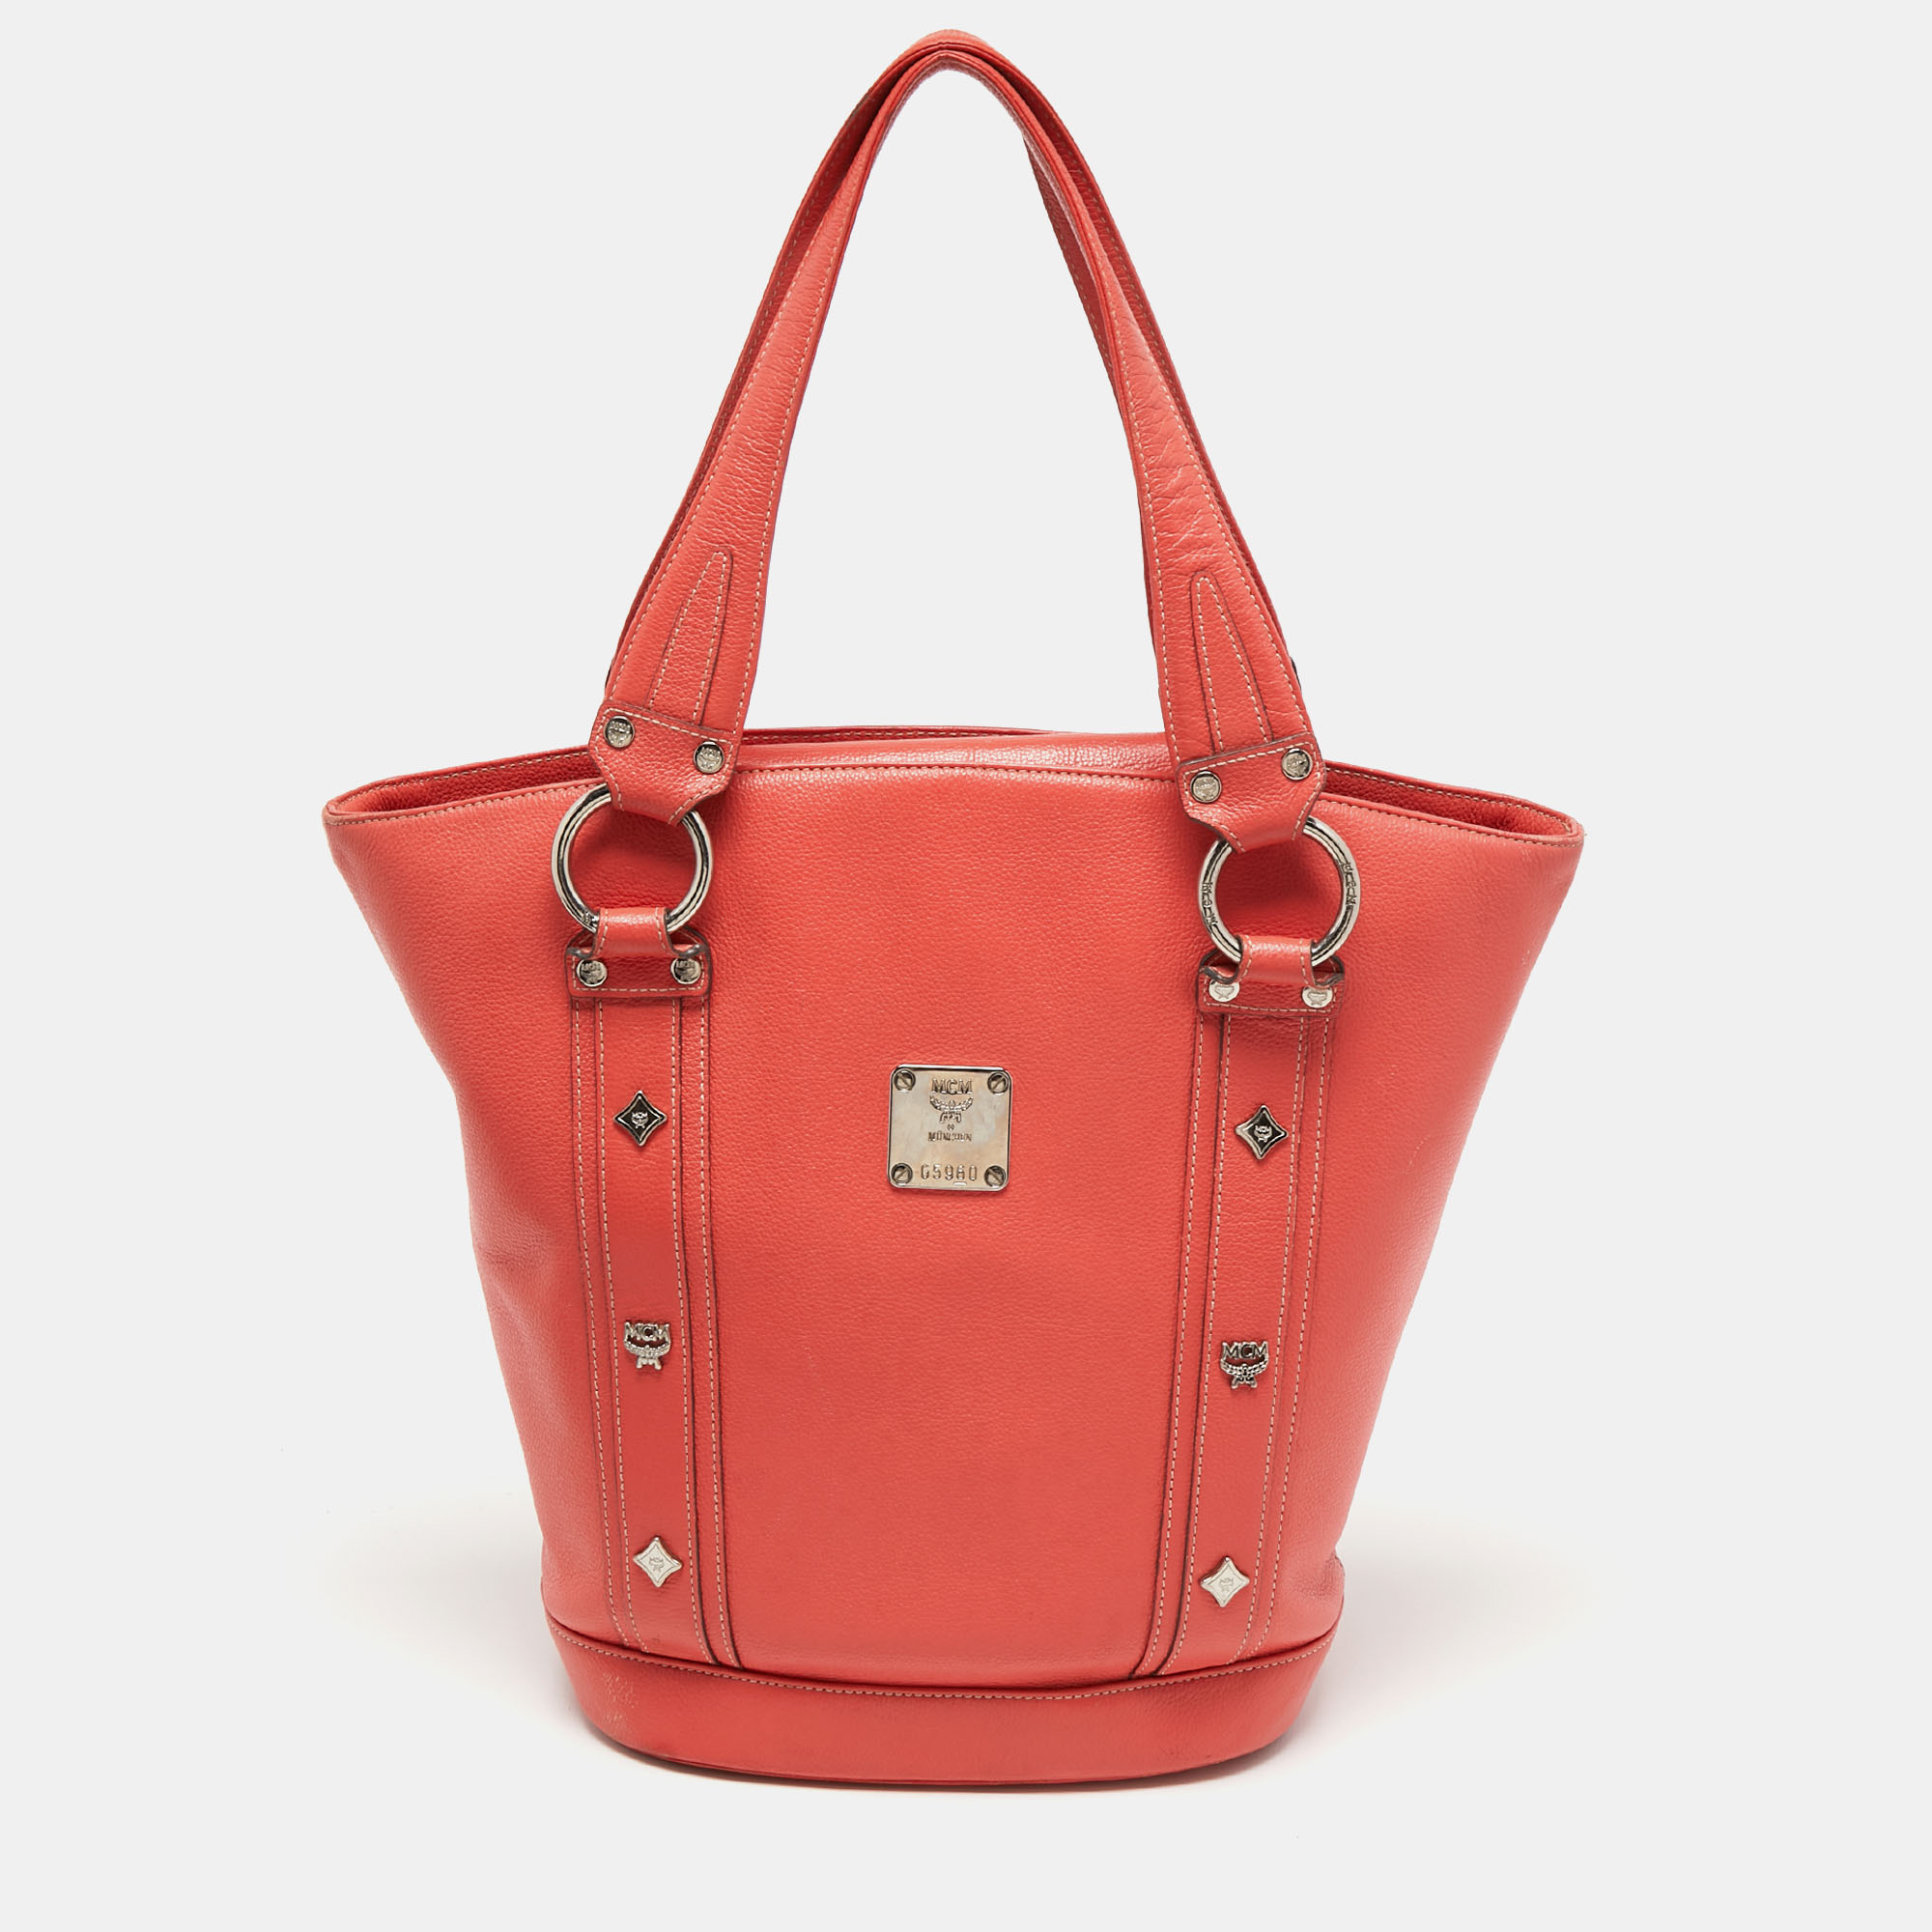 Pre-owned Mcm Orange Pebbled Leather Studded Tote